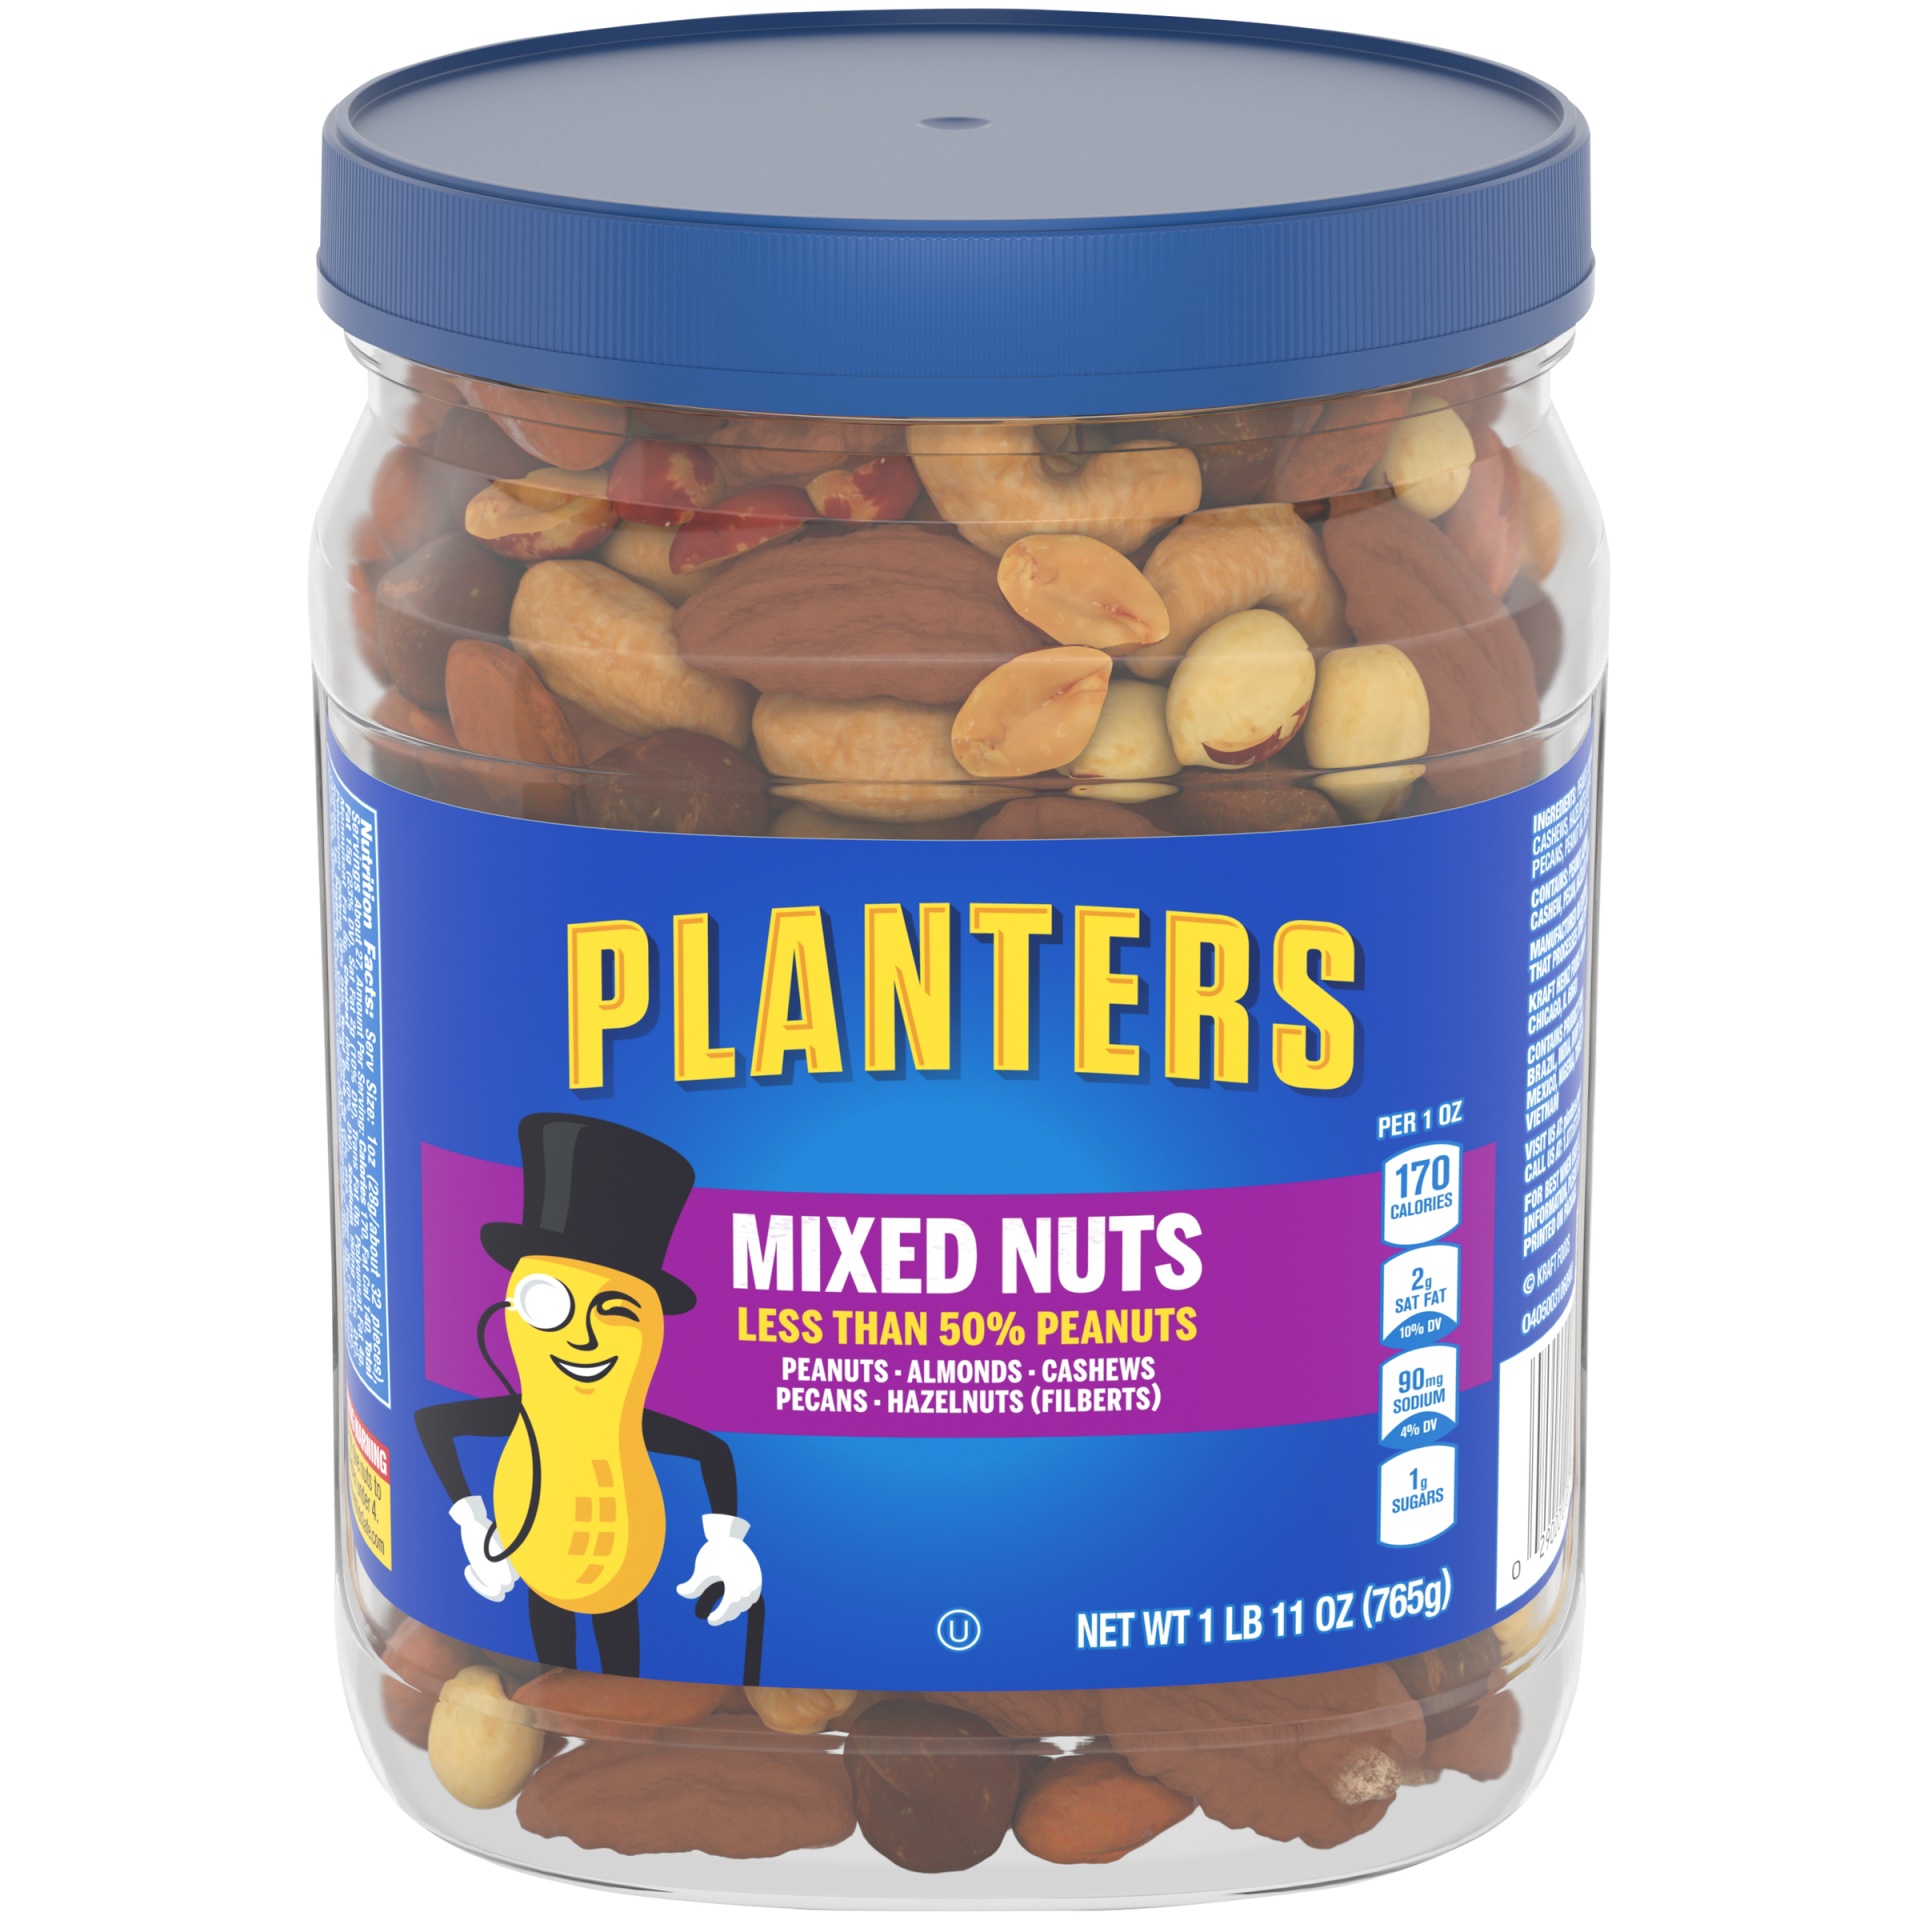 slide 1 of 14, Planters Mixed Nuts Less Than 50% Peanuts with Peanuts, Almonds, Cashews, Pecans & Hazelnuts, 27 oz